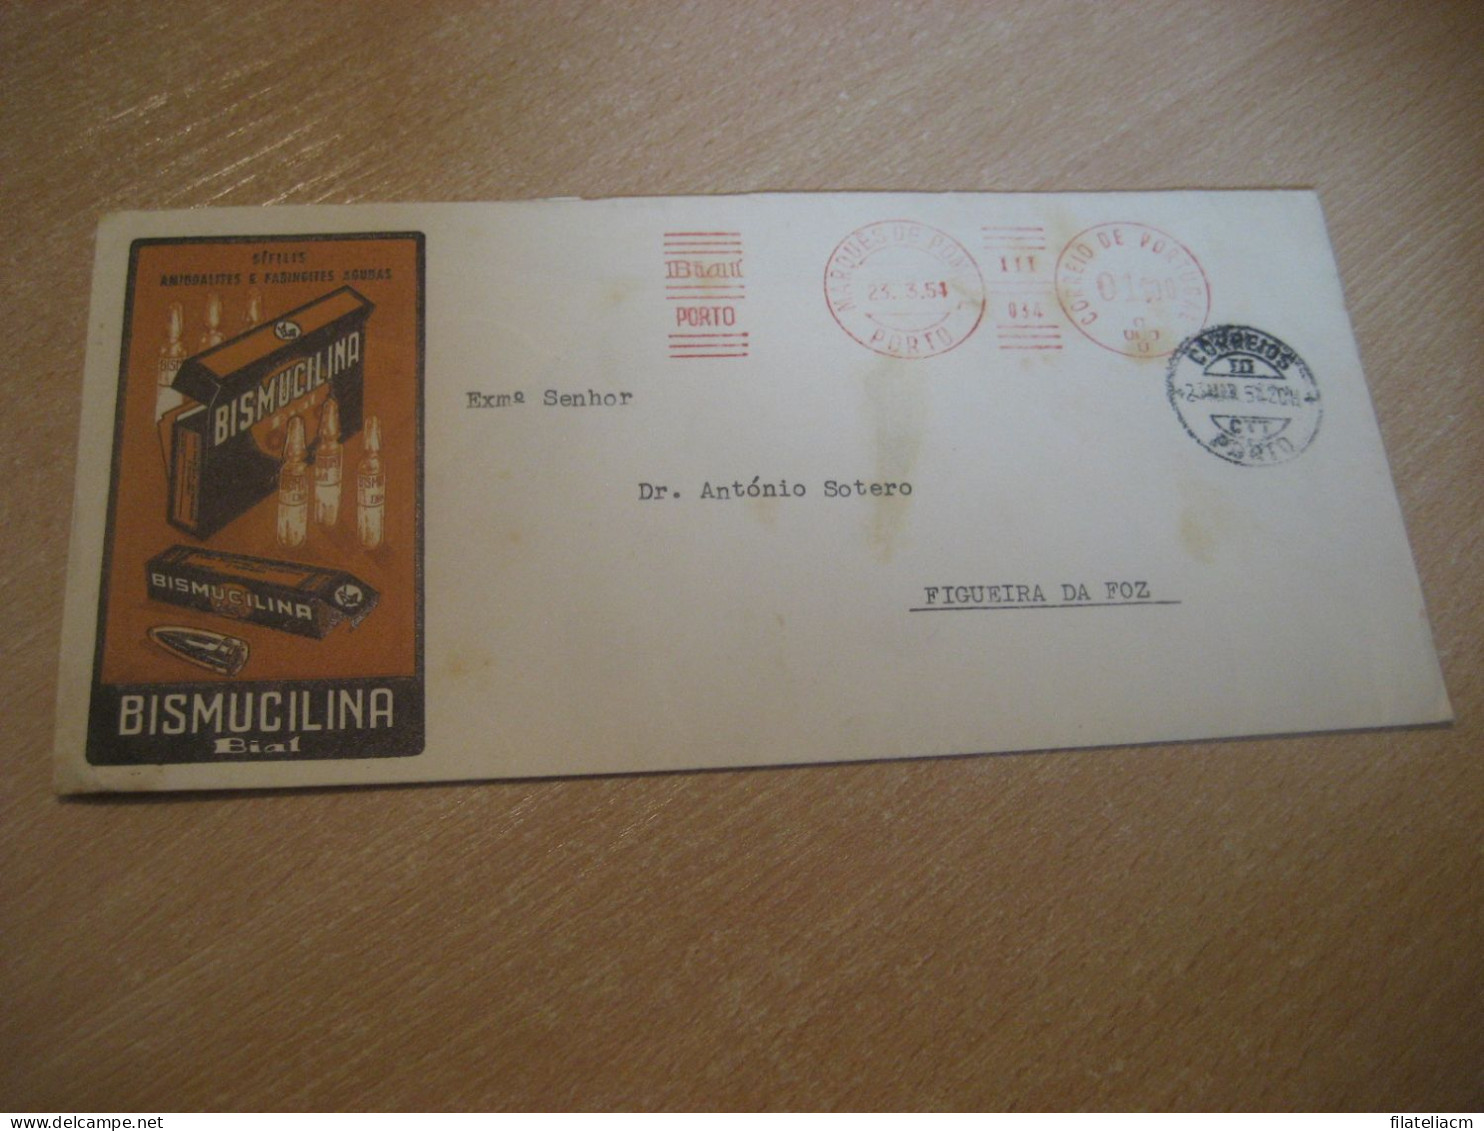 PORTO 1954 To Figueira Da Foz Bial Bismucilina Pharmacy Health Chemical Meter Mail Cancel Cover PORTUGAL - Lettres & Documents